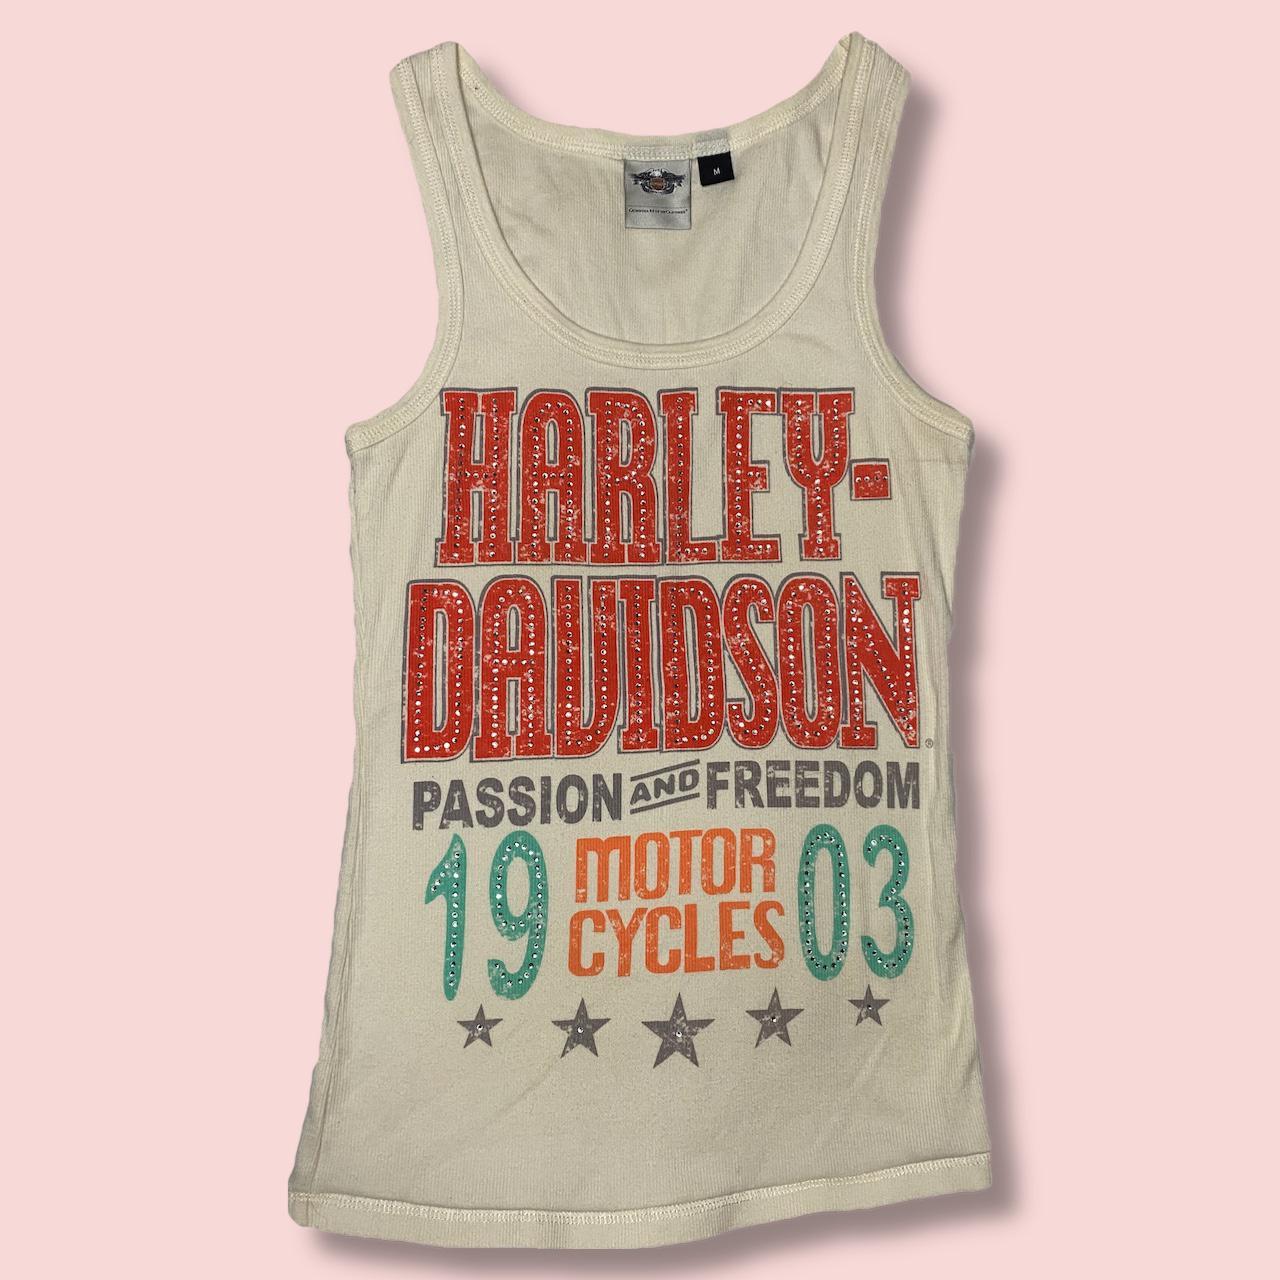 Product Image 1 - FREE SHIPPING ❤️‍🔥📦
Harley Davidson bedazzled